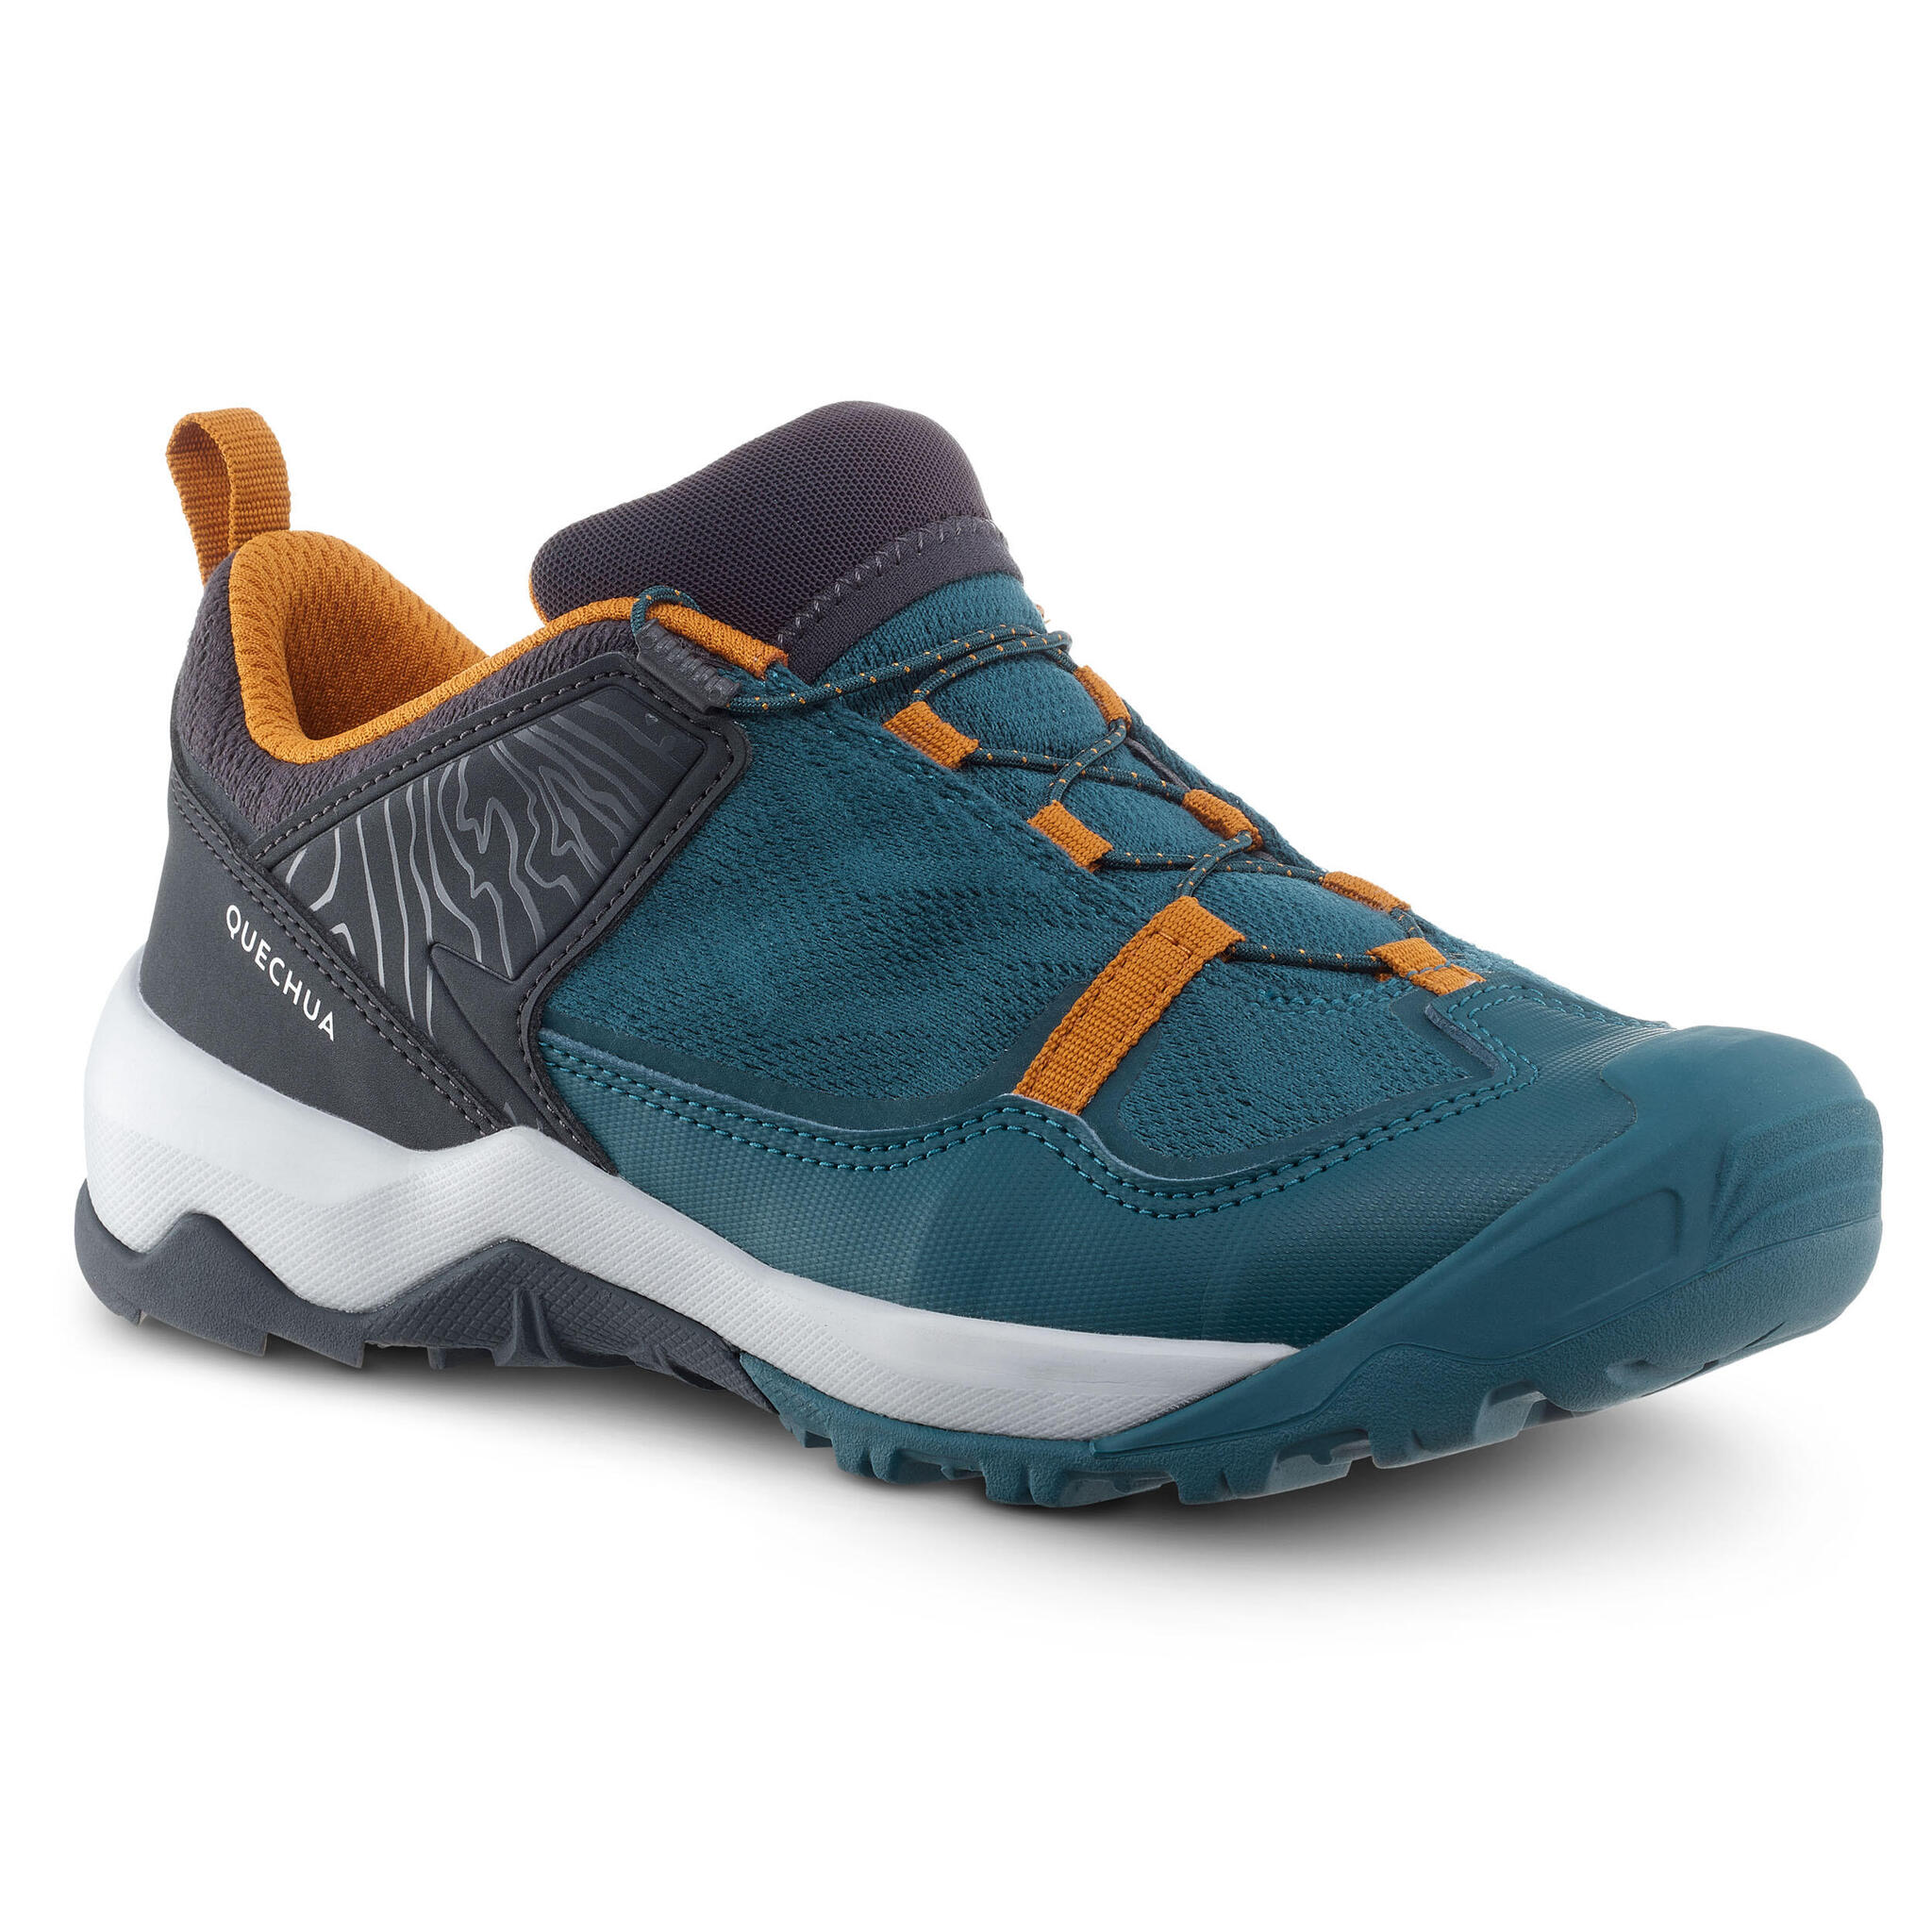 Kids' Mountain Hiking Shoes with Quick Lacing Crossrock - Blue